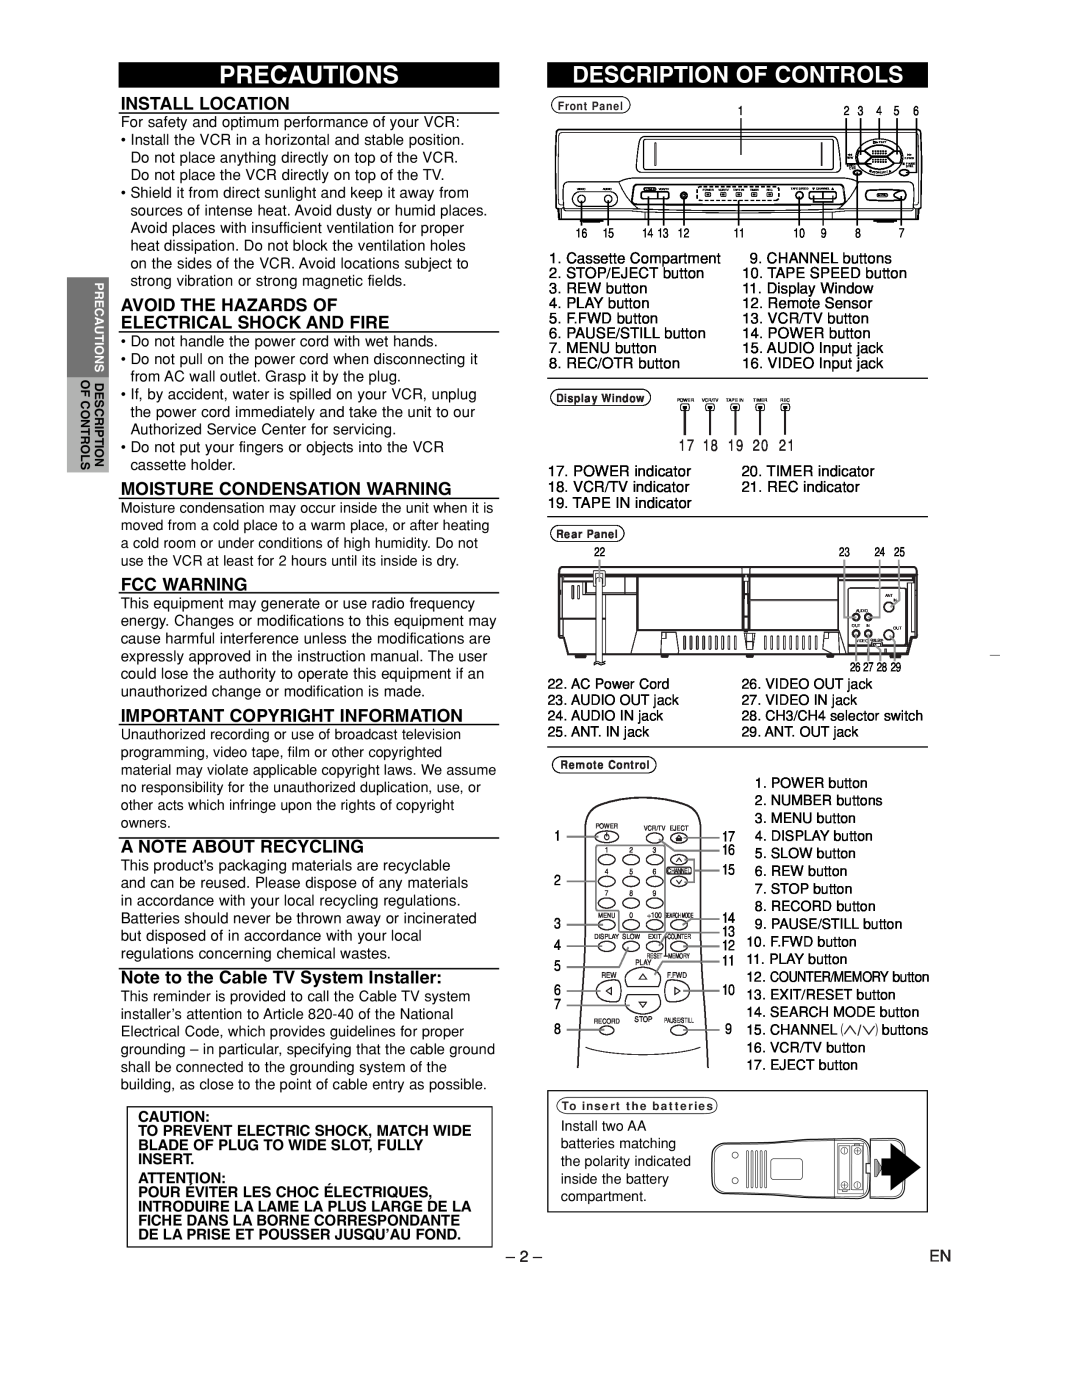 Sylvania 6240VC1 owner manual Precautions, Install Location, Avoid The Hazards Of Electrical Shock And Fire, Fcc Warning 